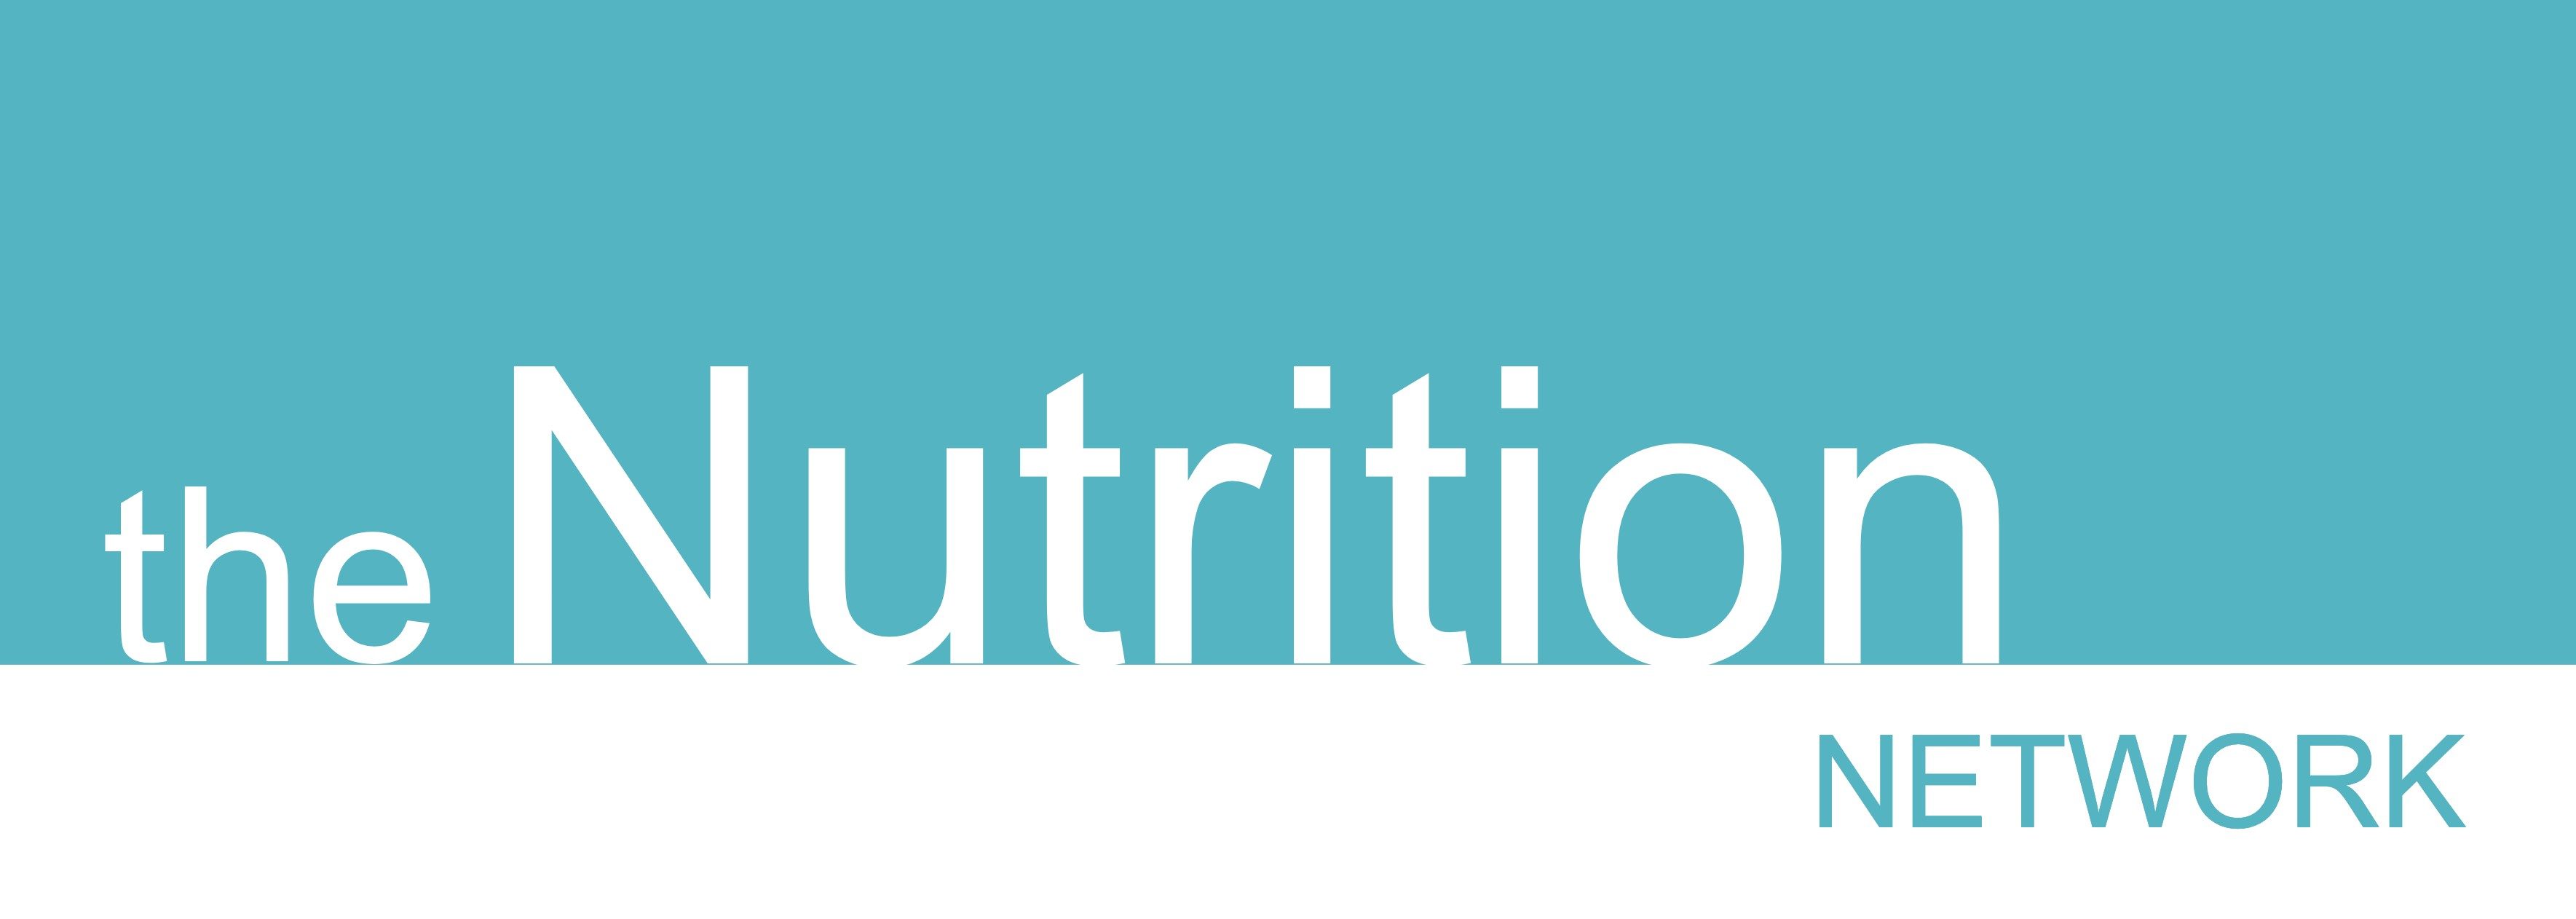 The Nutrition Network UK